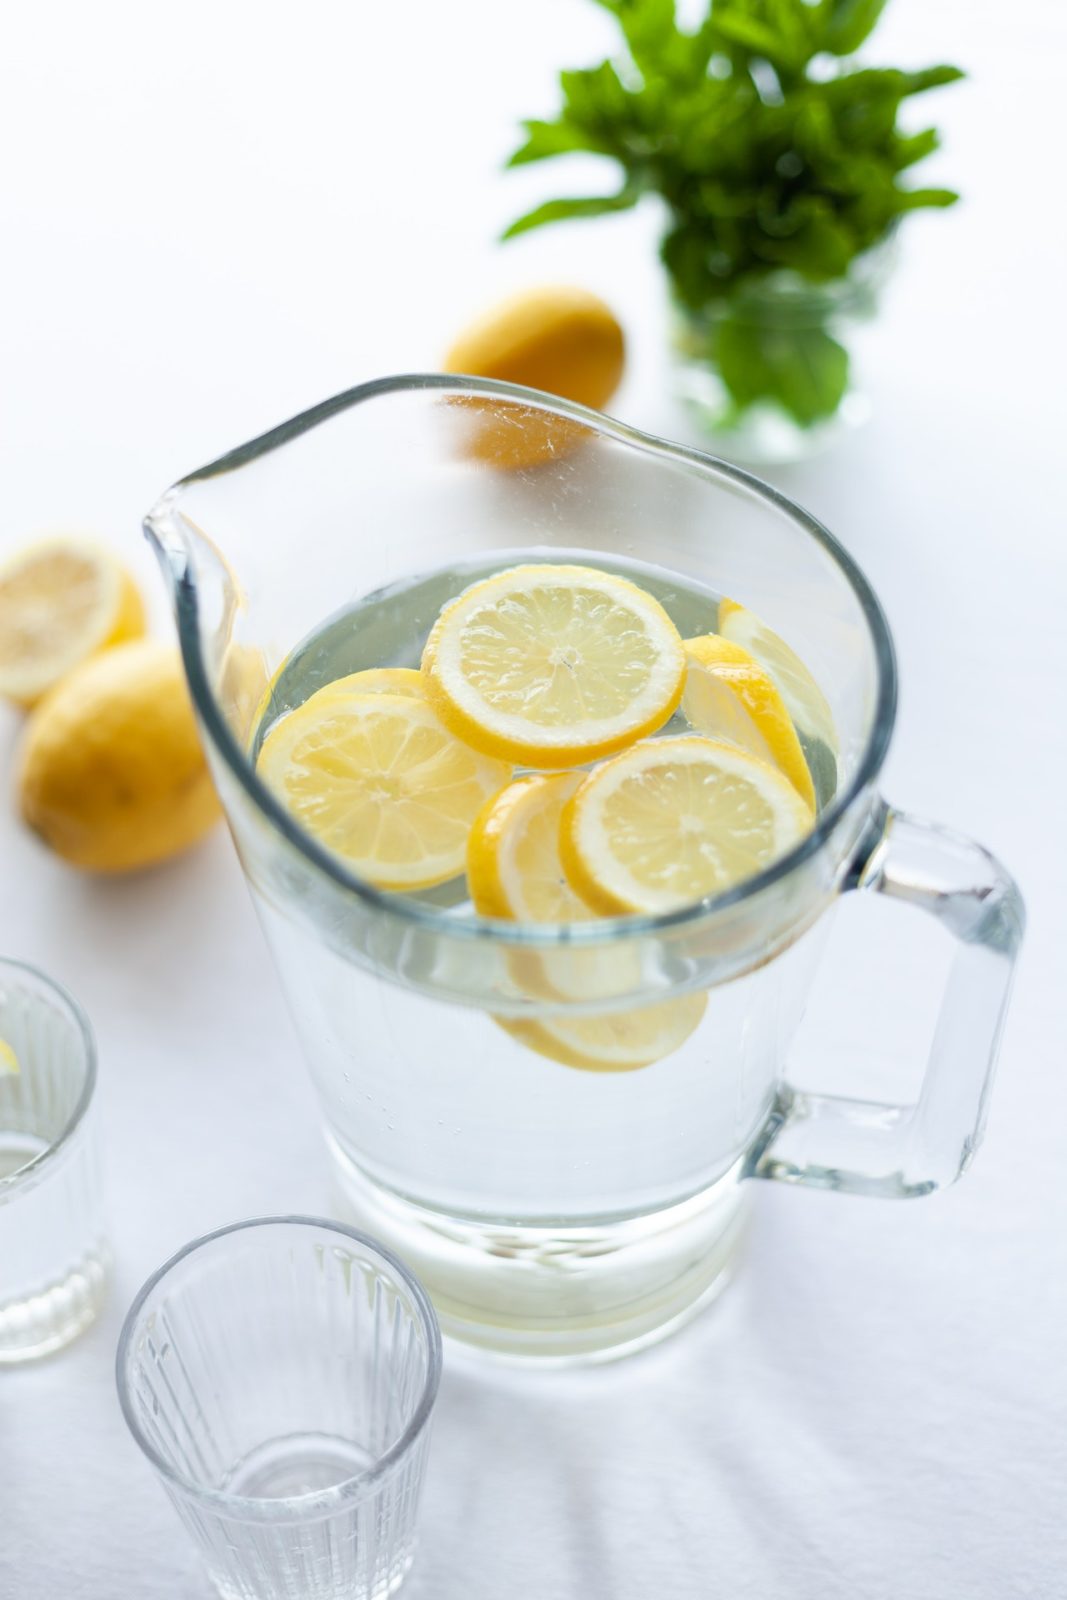 large clear pitcher of water with slices of lemon